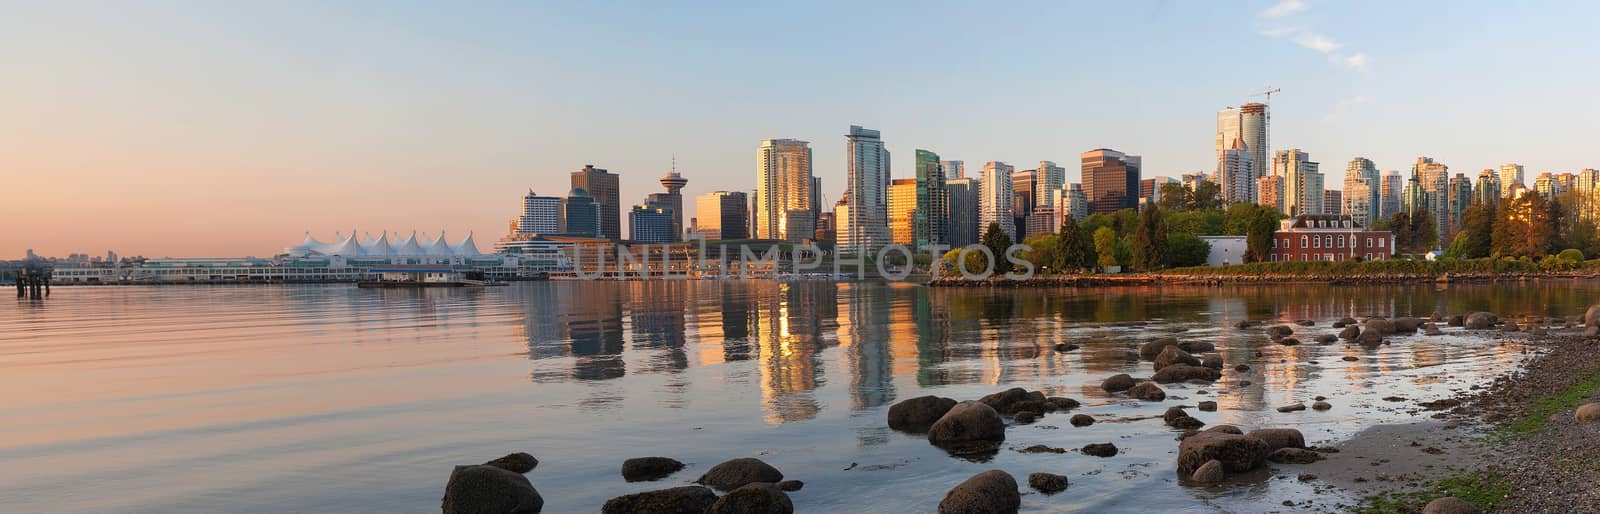 Vancouver British Columbia Canada City Skyline and Deadmans Island from Stanley Park at Sunrise Panorama